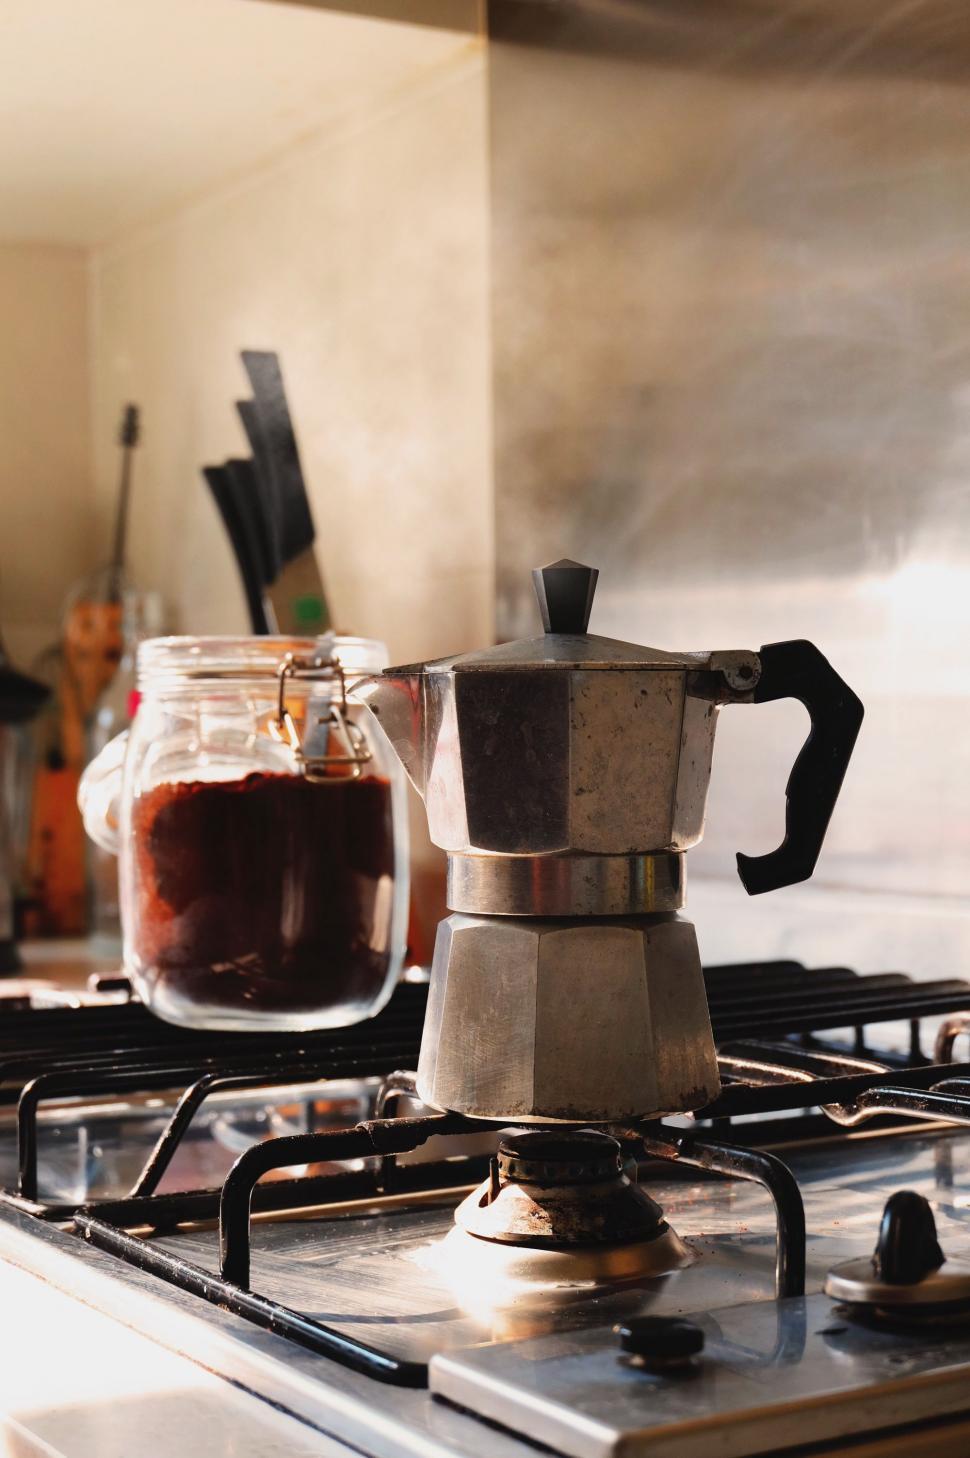 Free Image of Coffee Pot on Stove Top 